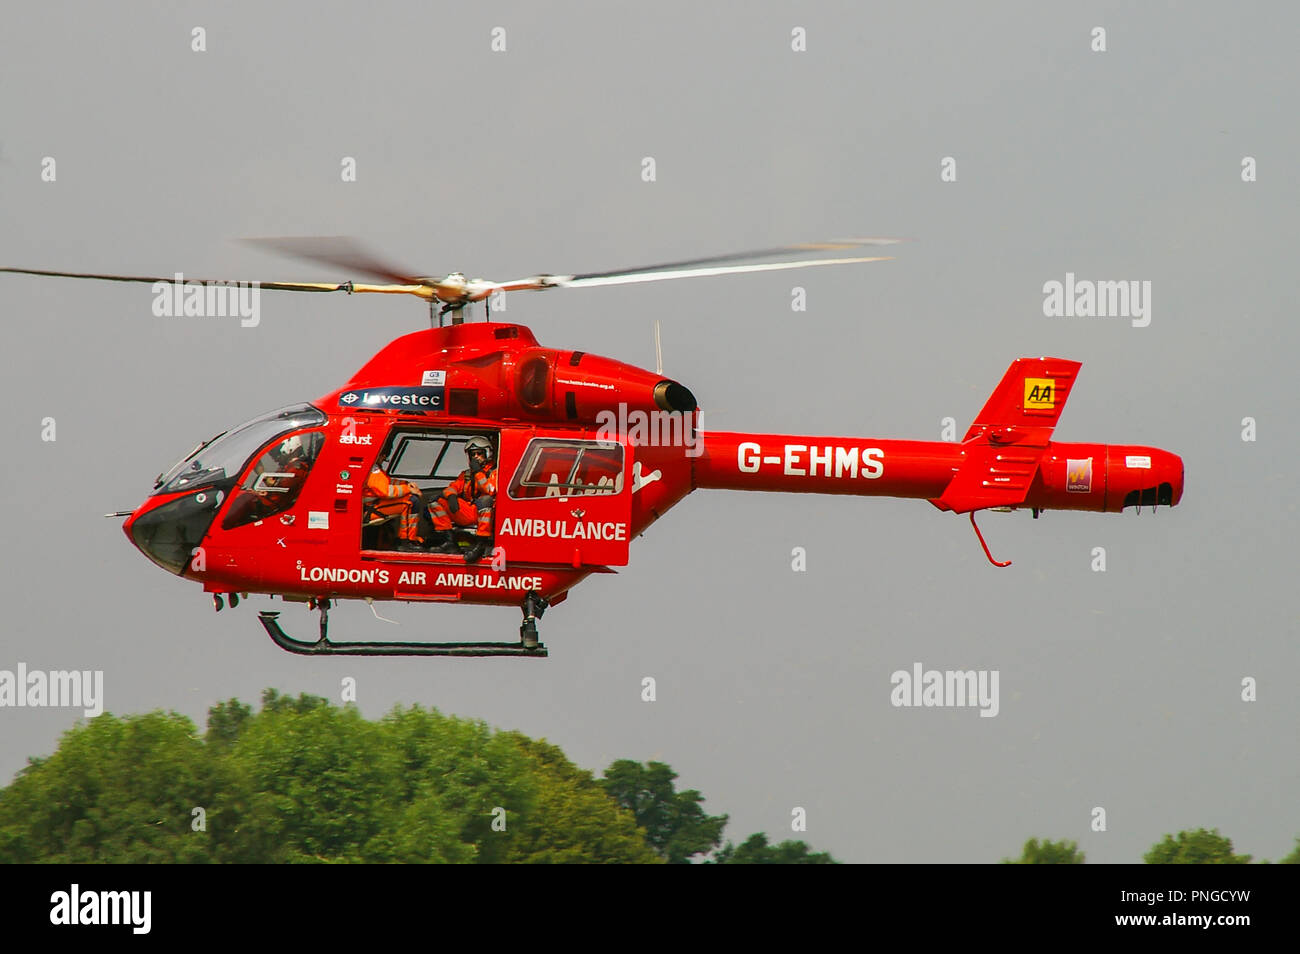 London Air Ambulance helicopter MD900 Explorer G-EHMS, sponsored by AA and Investec, flying. Crew, medics. London's Air Ambulance Stock Photo